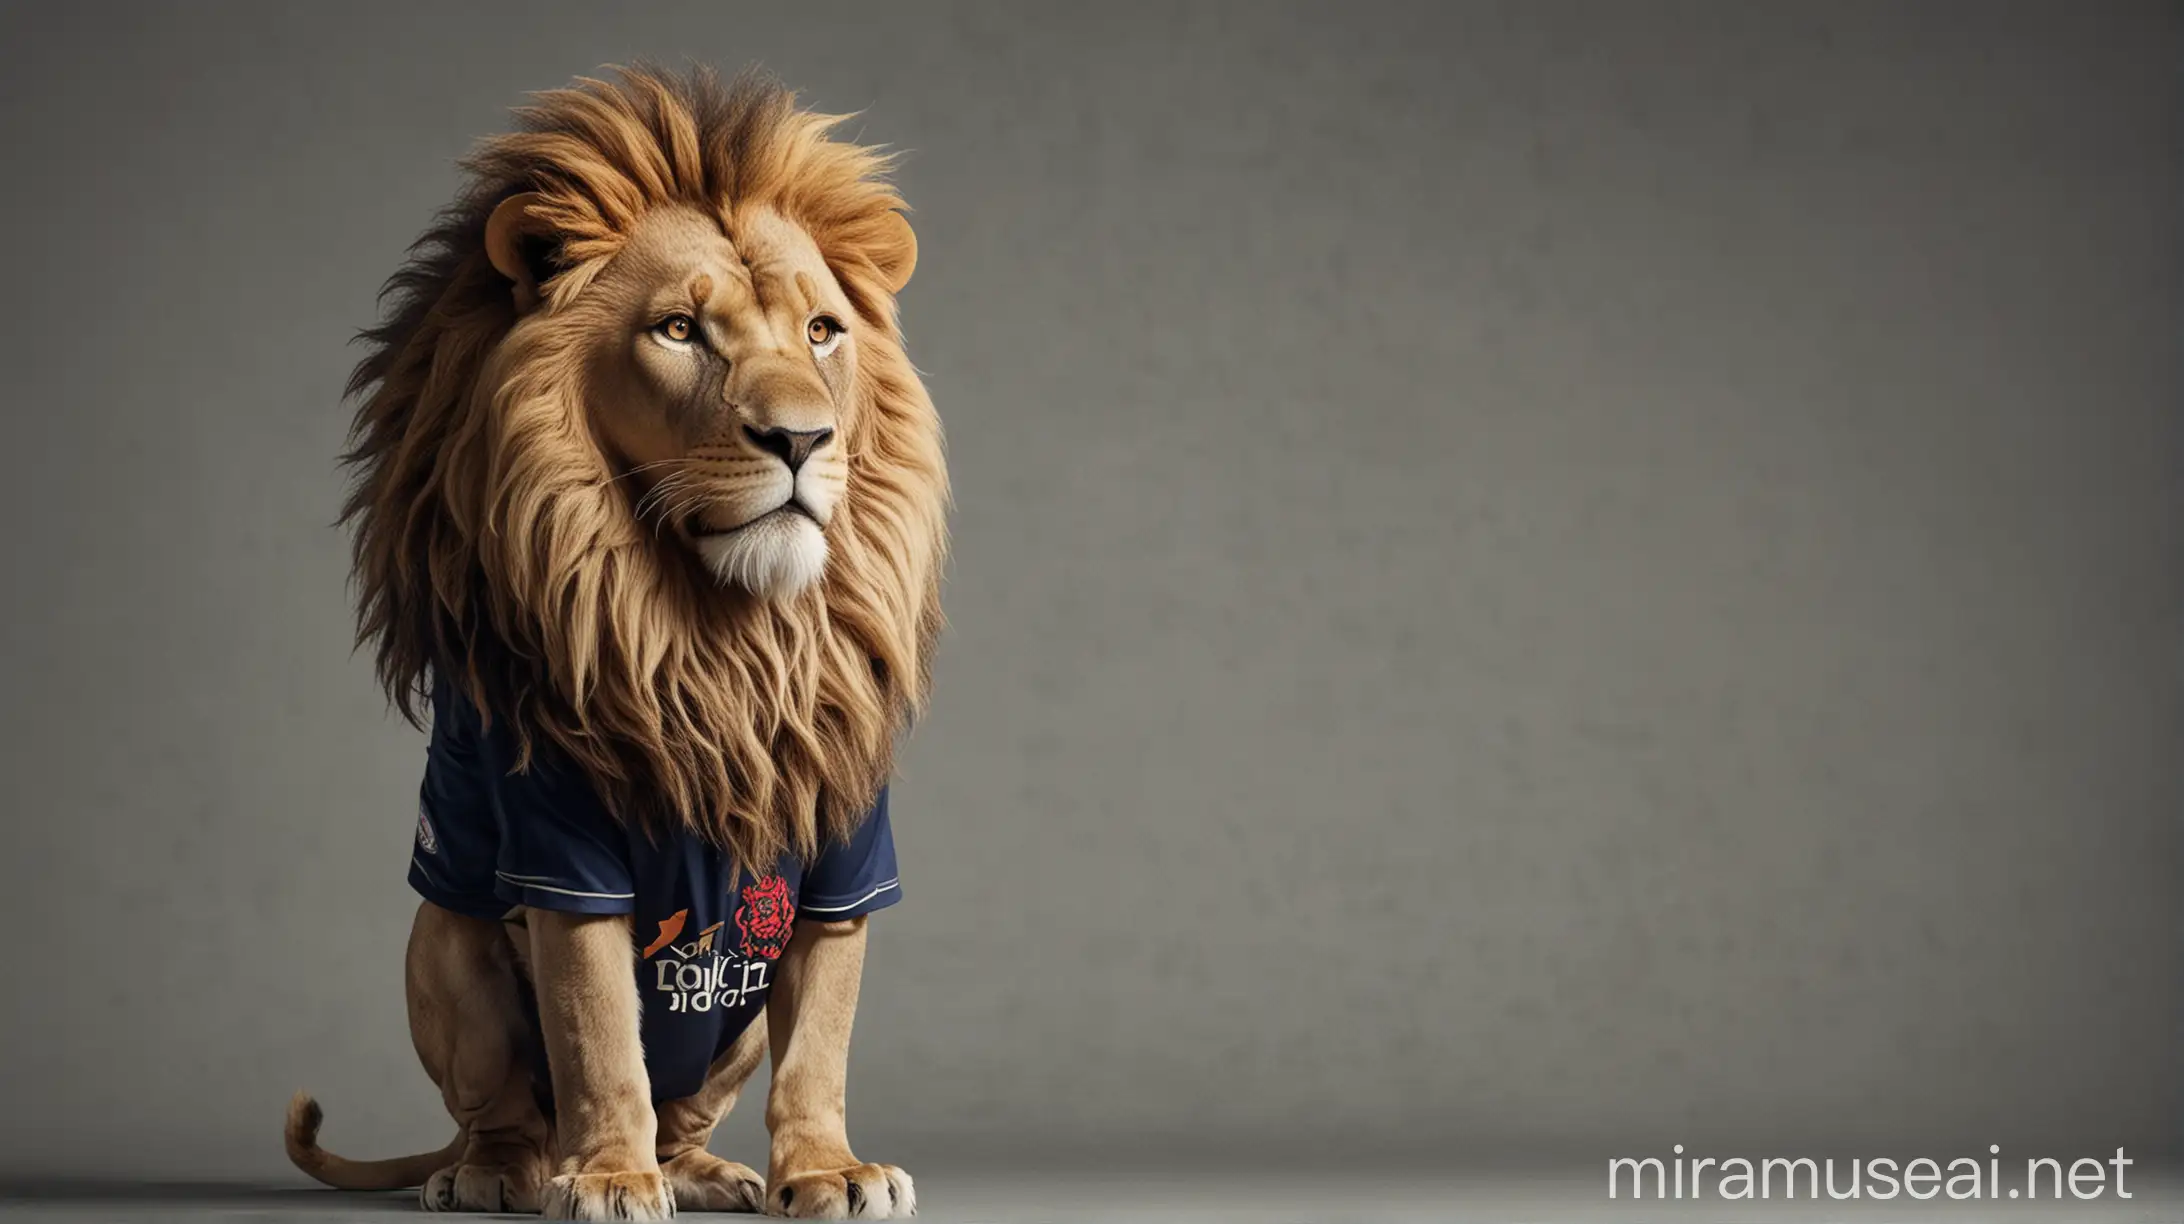 The lion wears the shirt of the English team